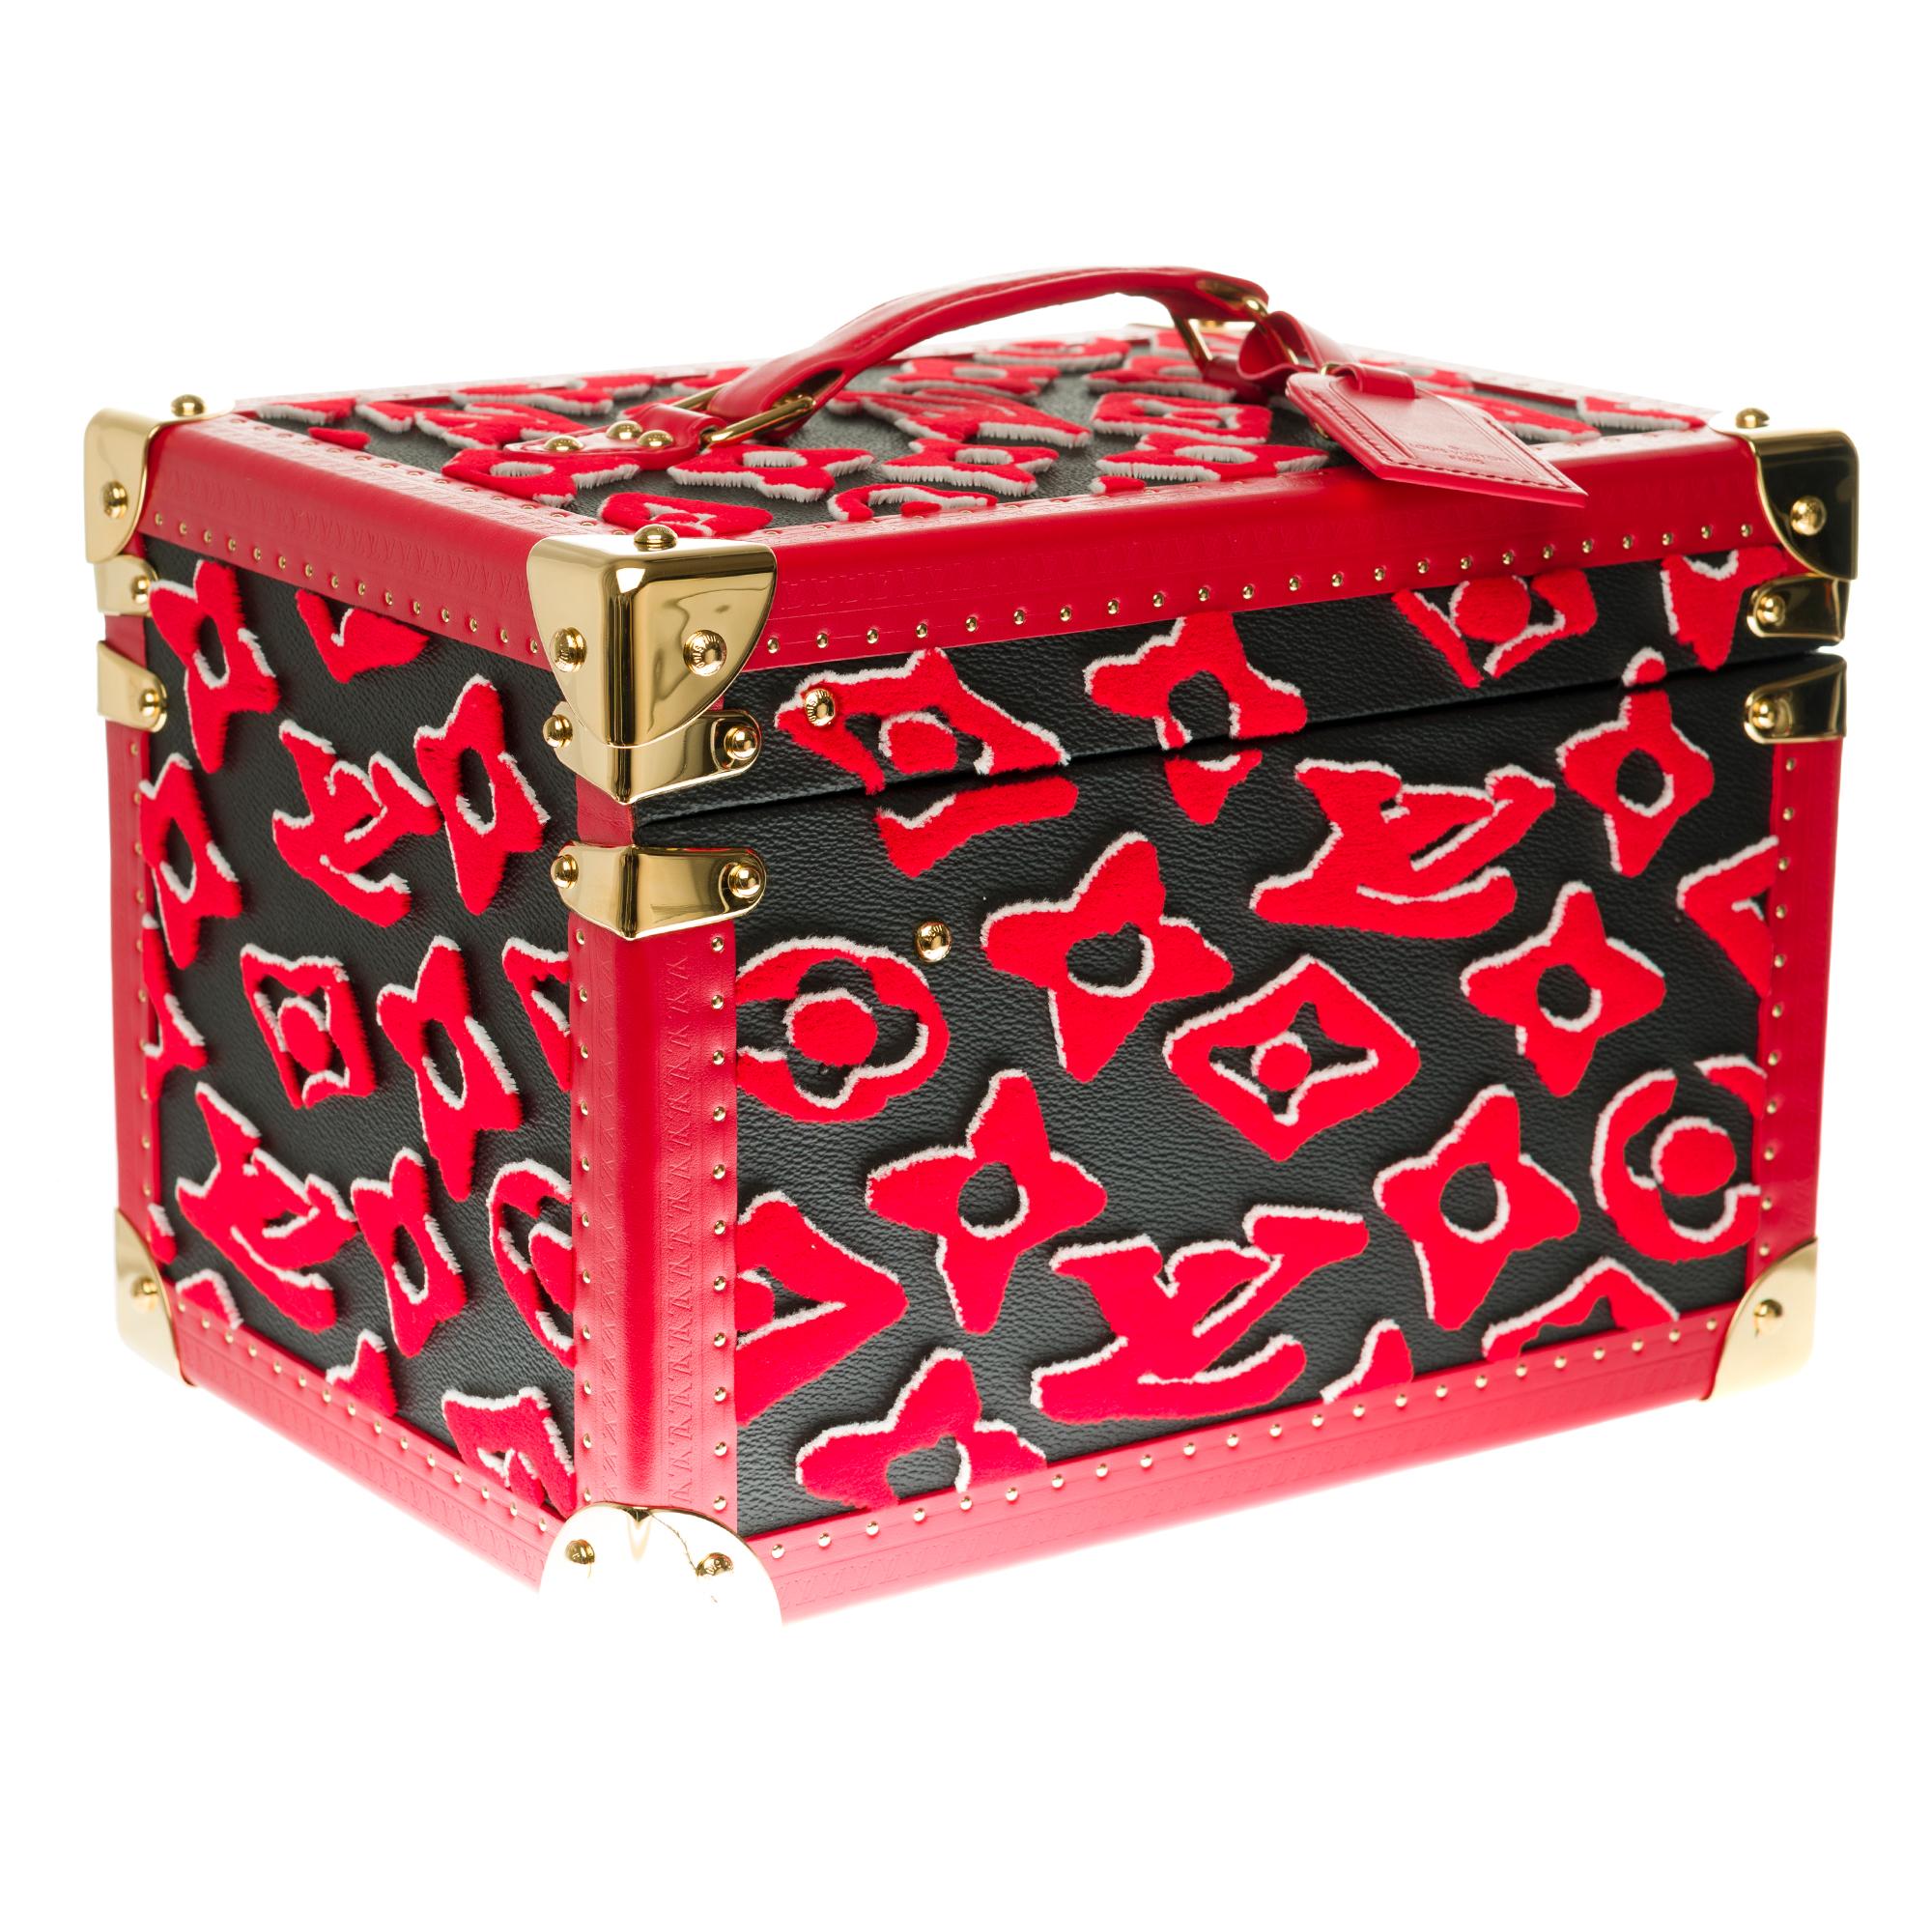 Women's Ultra limited/Few pieces in the world/Louis Vuitton Vanity Case in red Tufa